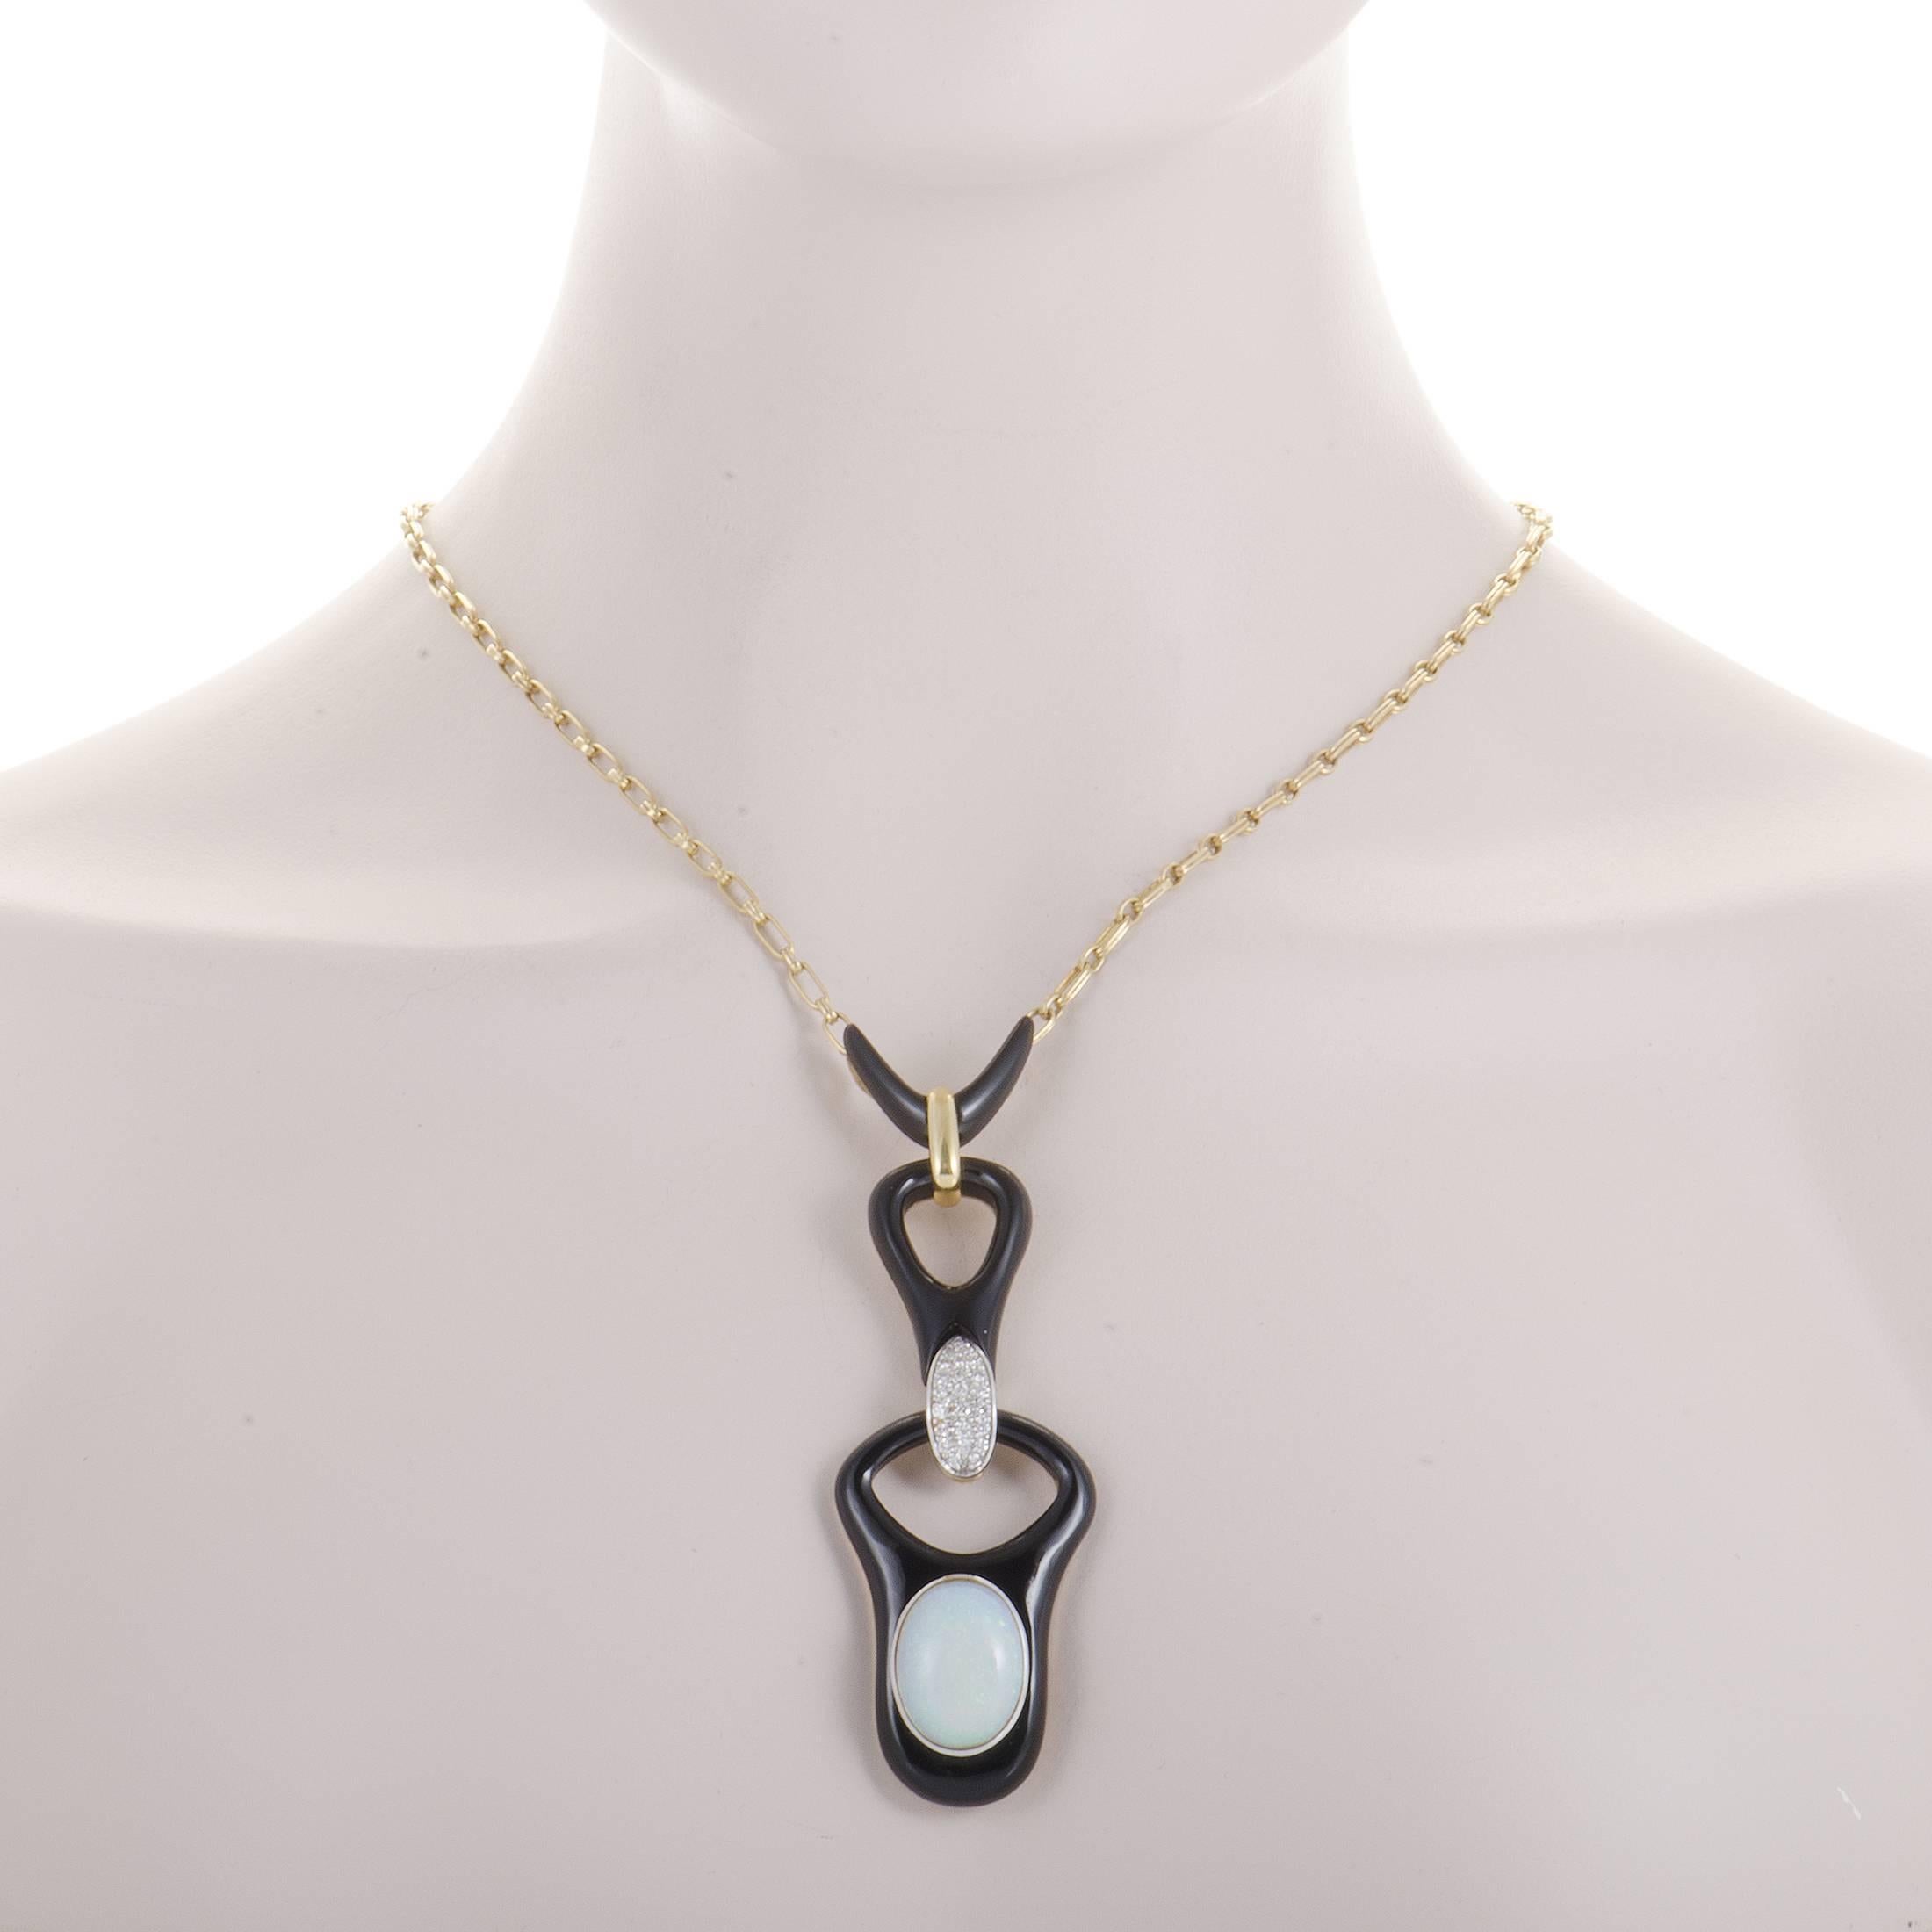 Intriguing décor is comprised of stunningly dark and smooth onyx stones as well as a marvelous opal weighing approximately 12.00 carats in this remarkable necklace which is made of 18K yellow and white gold while also set with 0.60ct of glistening